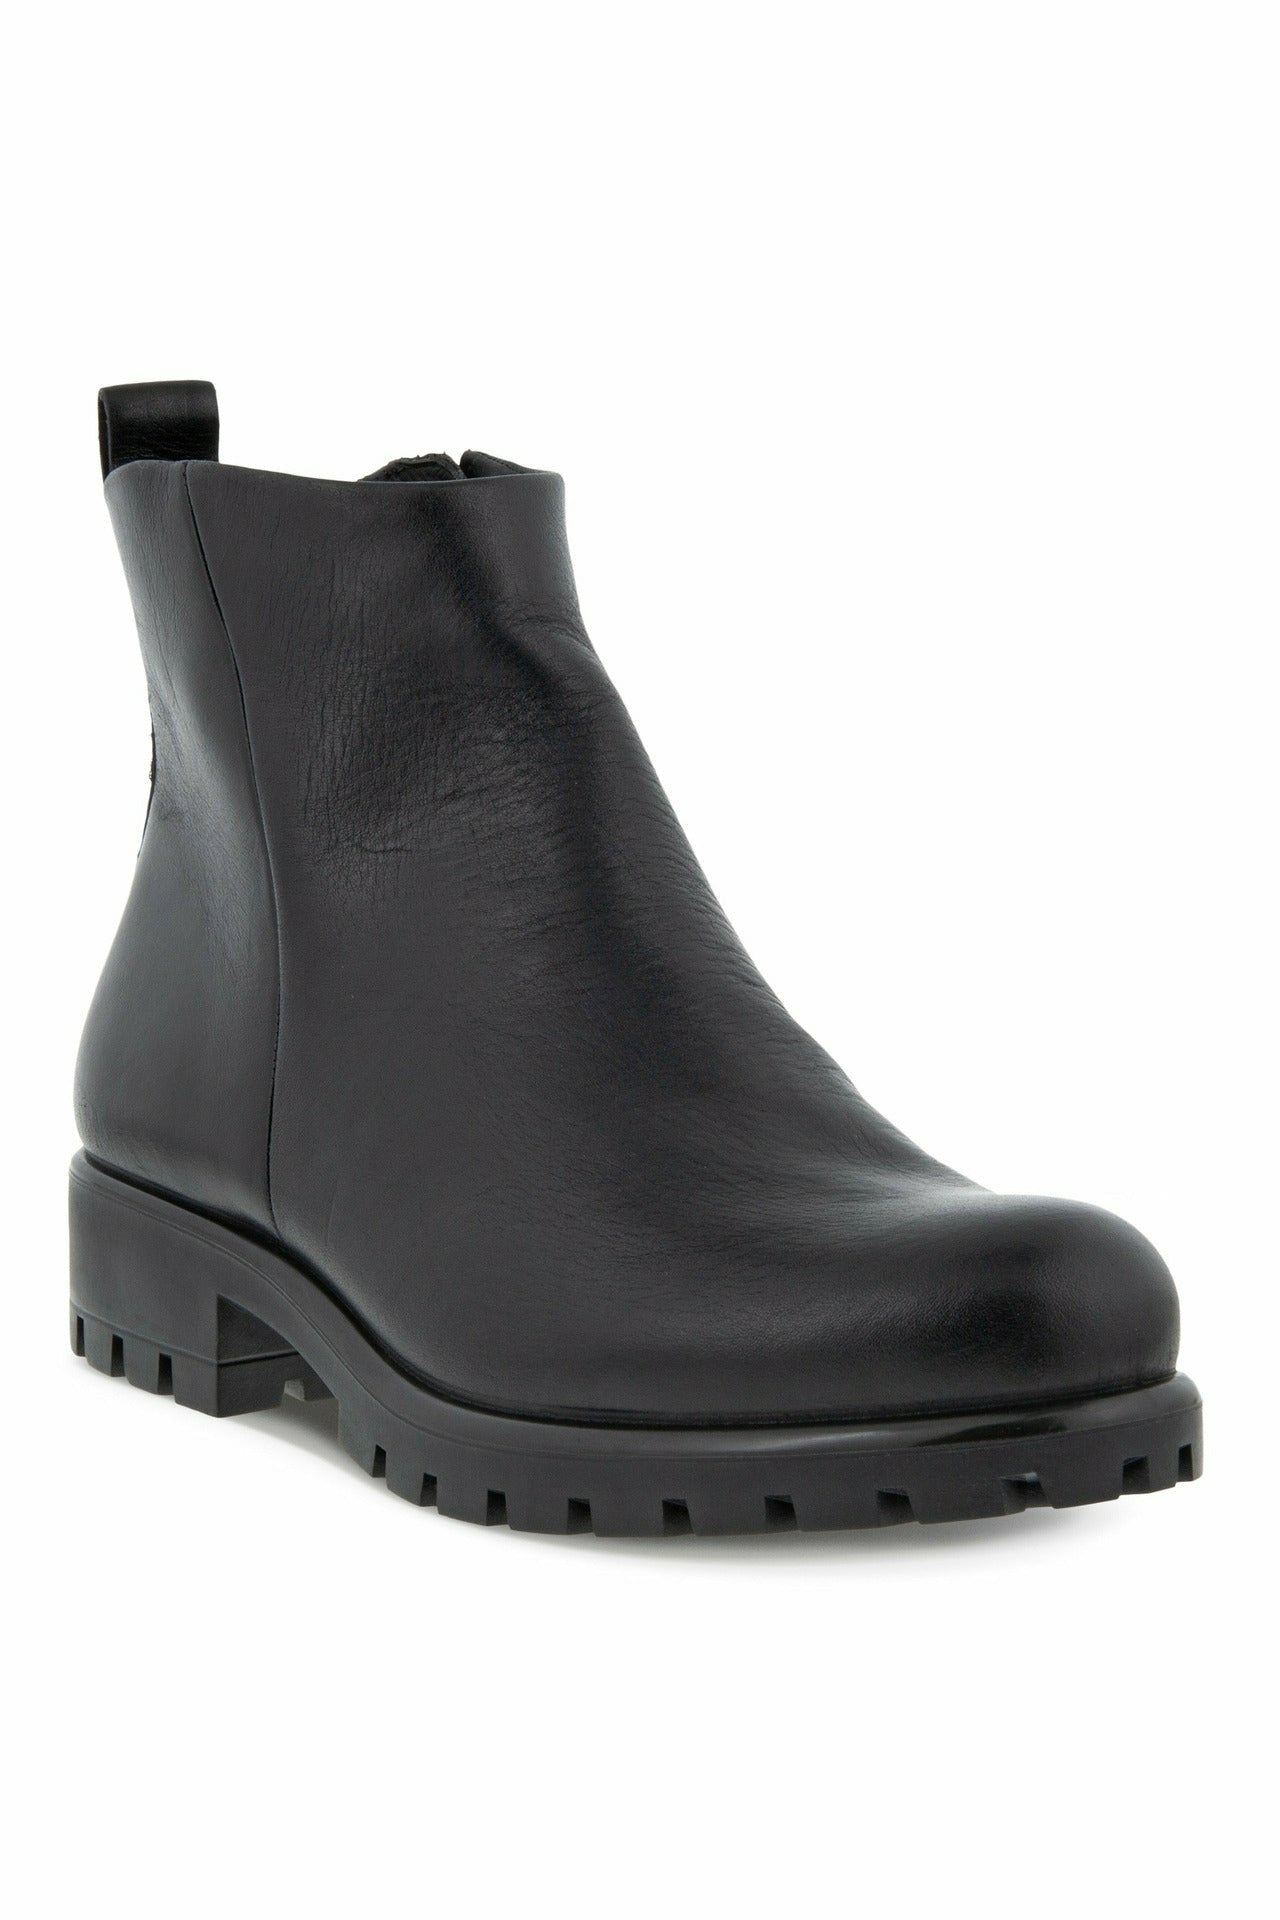 Ecco Modtray Ankle Boot 490063-01001